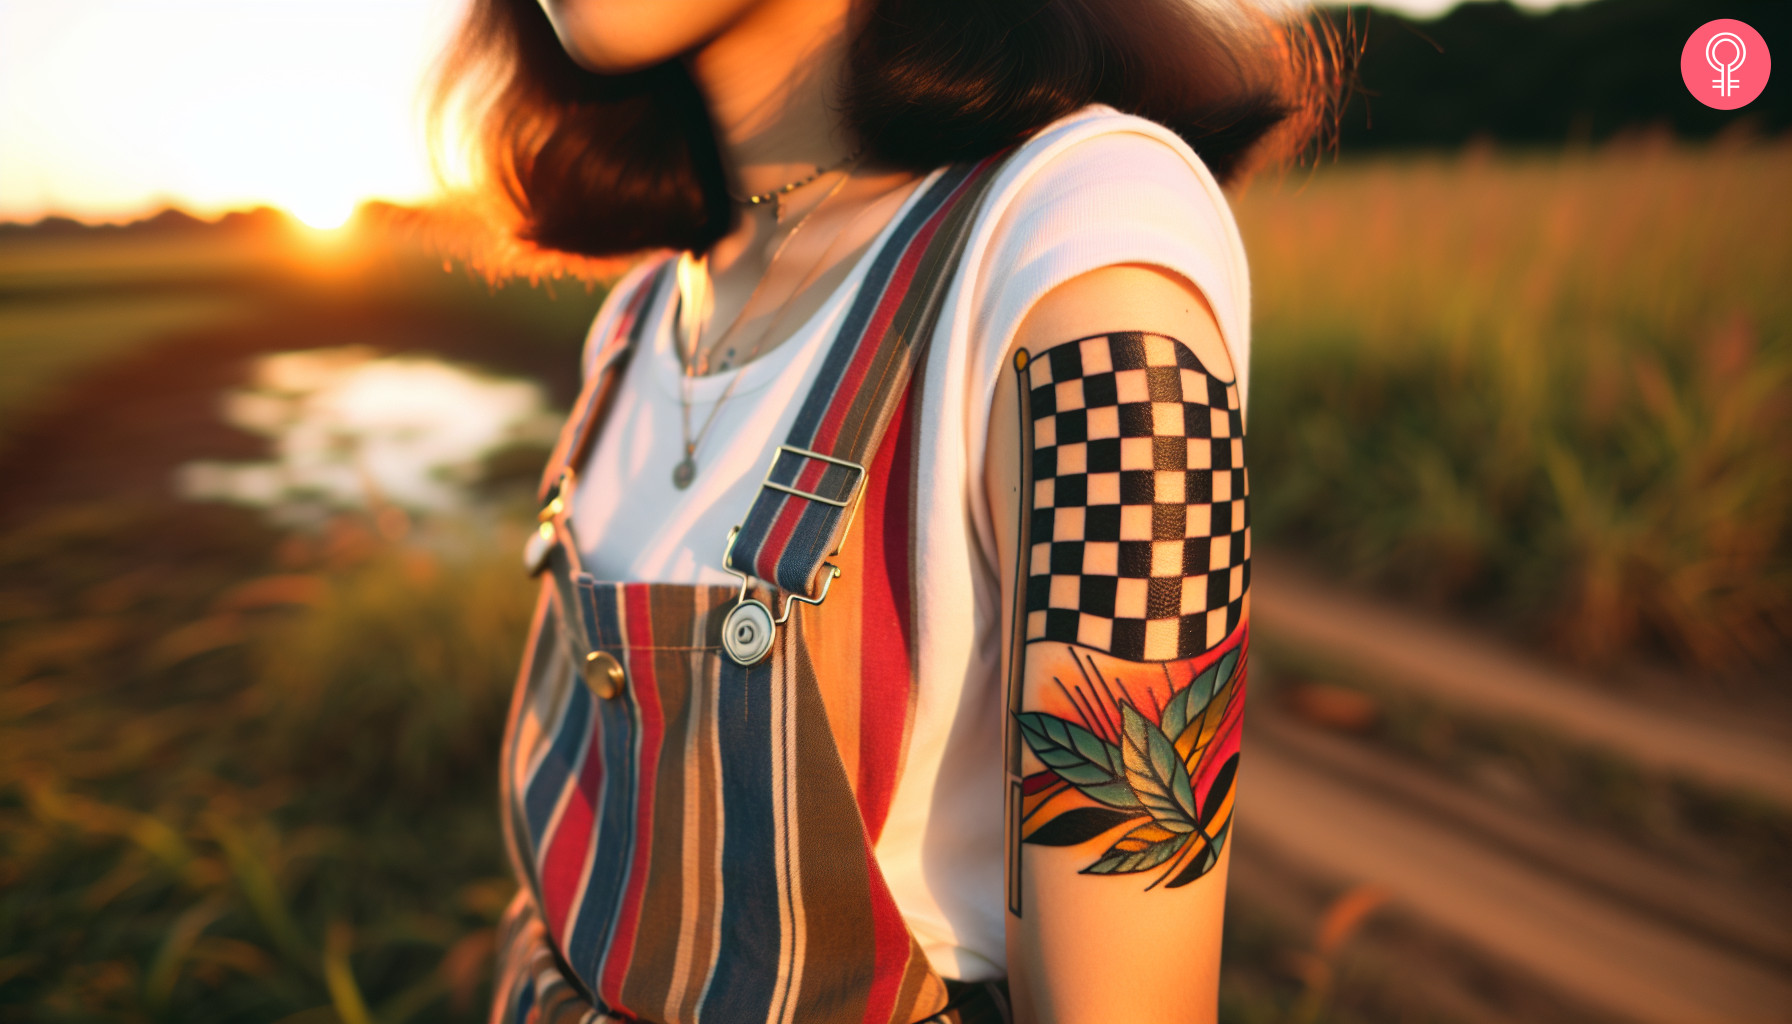 Traditional checkered flag tattoo on a woman’s arm